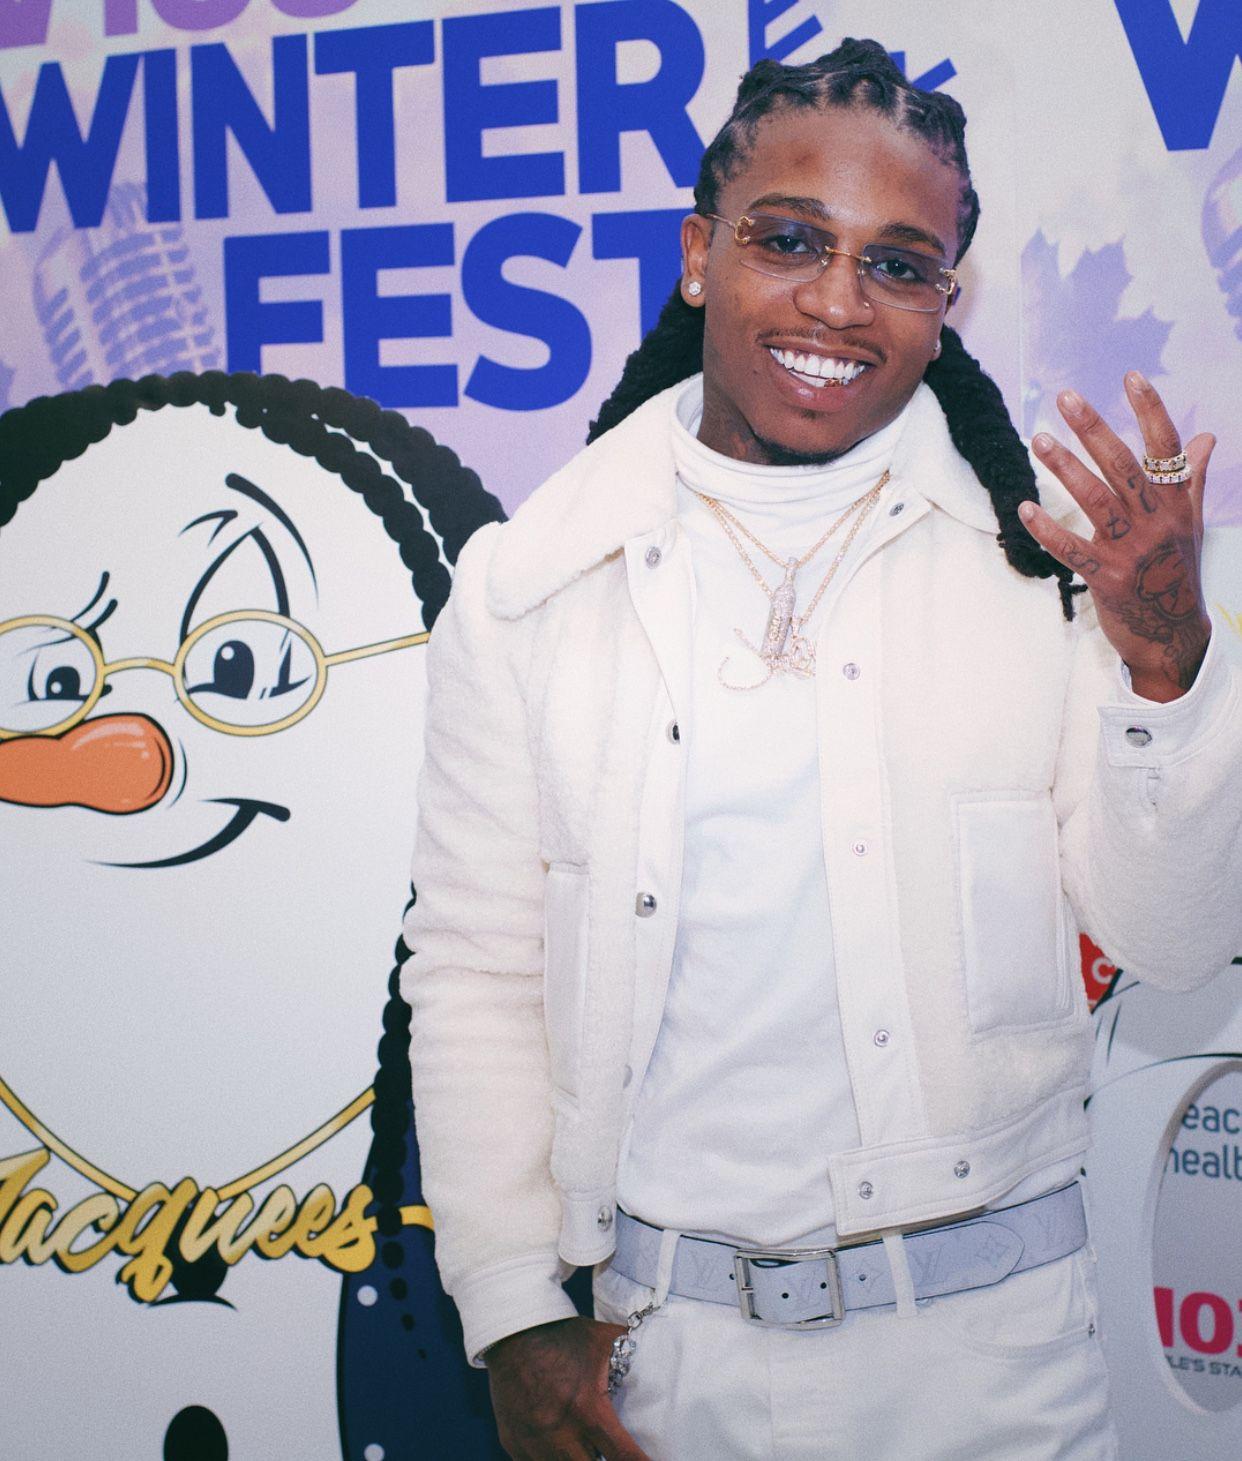 Jacquees #singer #jacquees PINTEREST:DEE✨✨. Celebrity